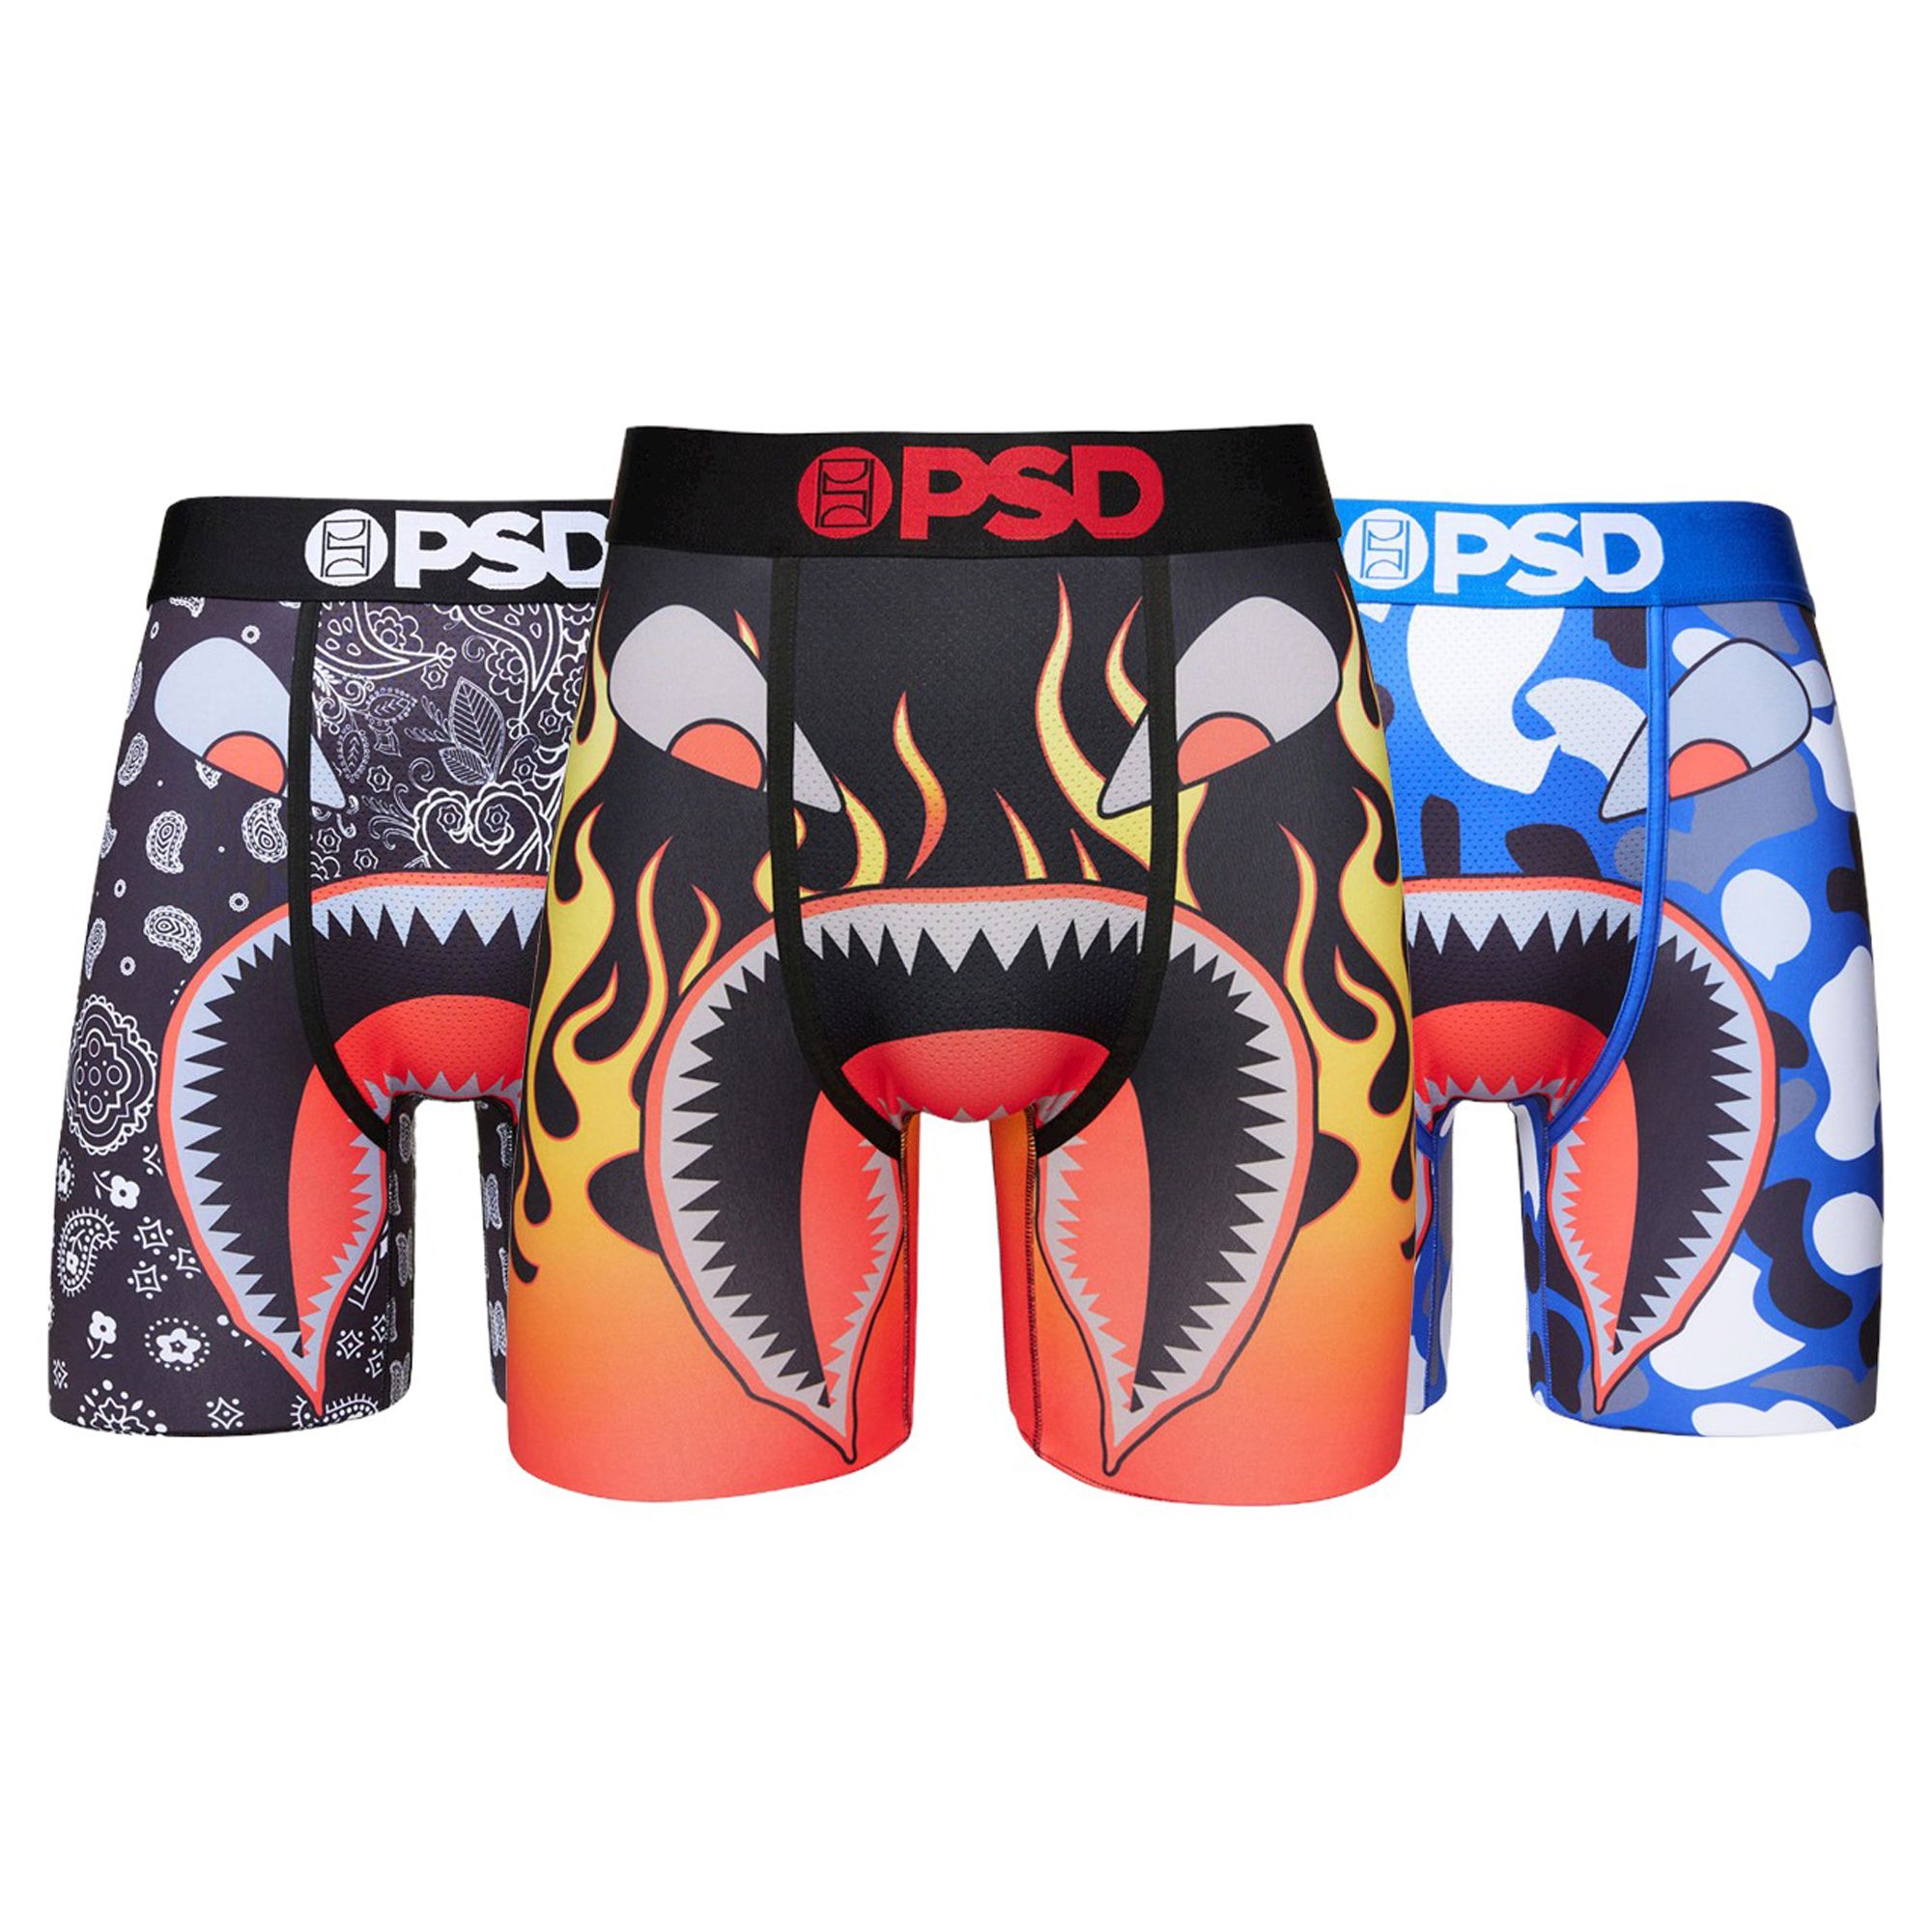 PSD Fire Red 3 Pack Stretch Boxer Briefs - Men's Boxers in Multi